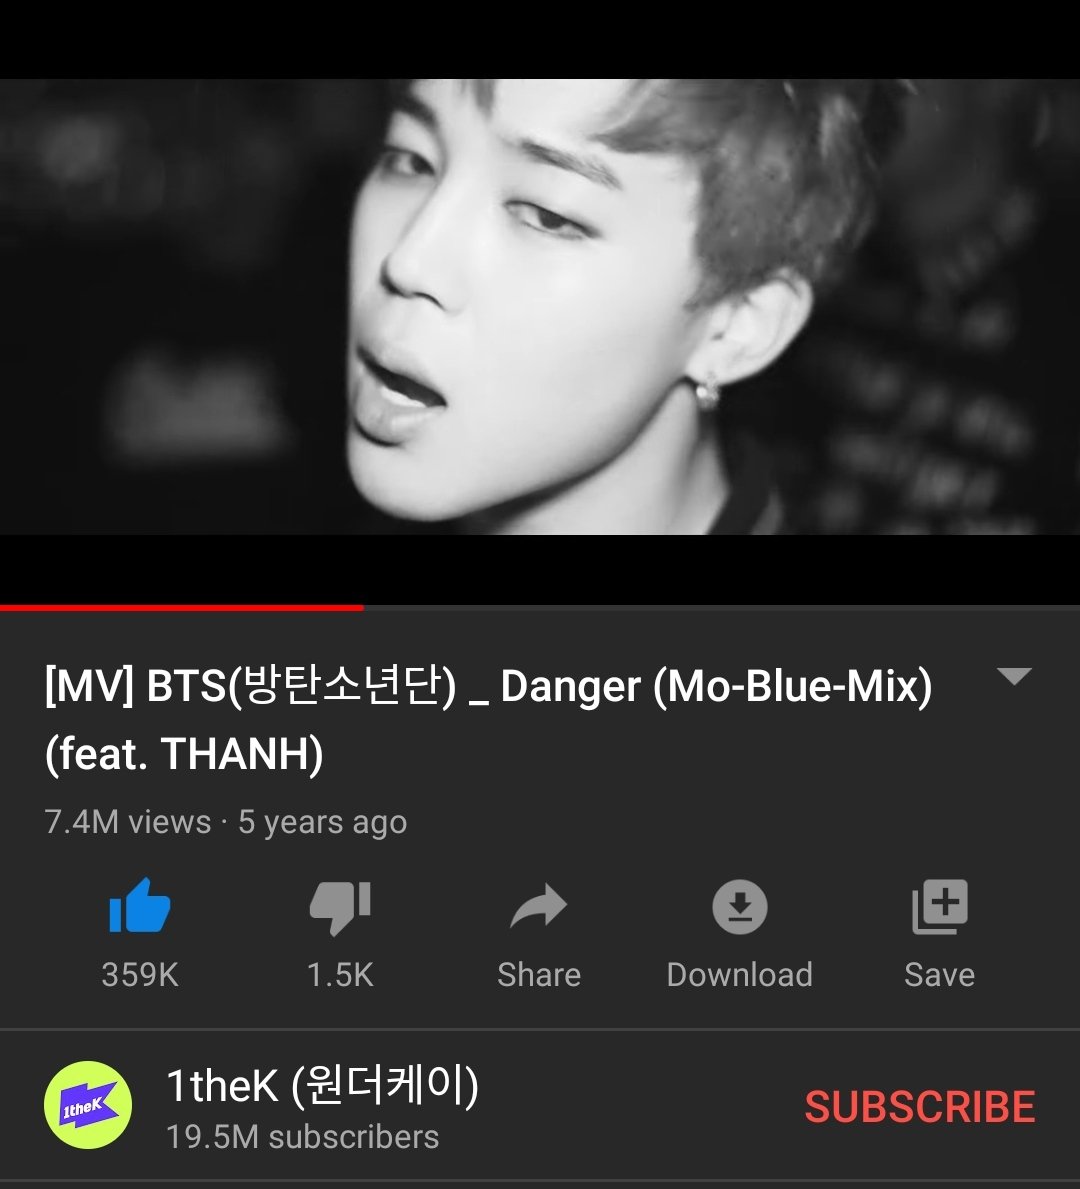 Lets go to DANGER, did you know danger had a remix/fea version WITH. An official music video? Hell yes it did and ITS AMAZING it was also their first MV black and white! 